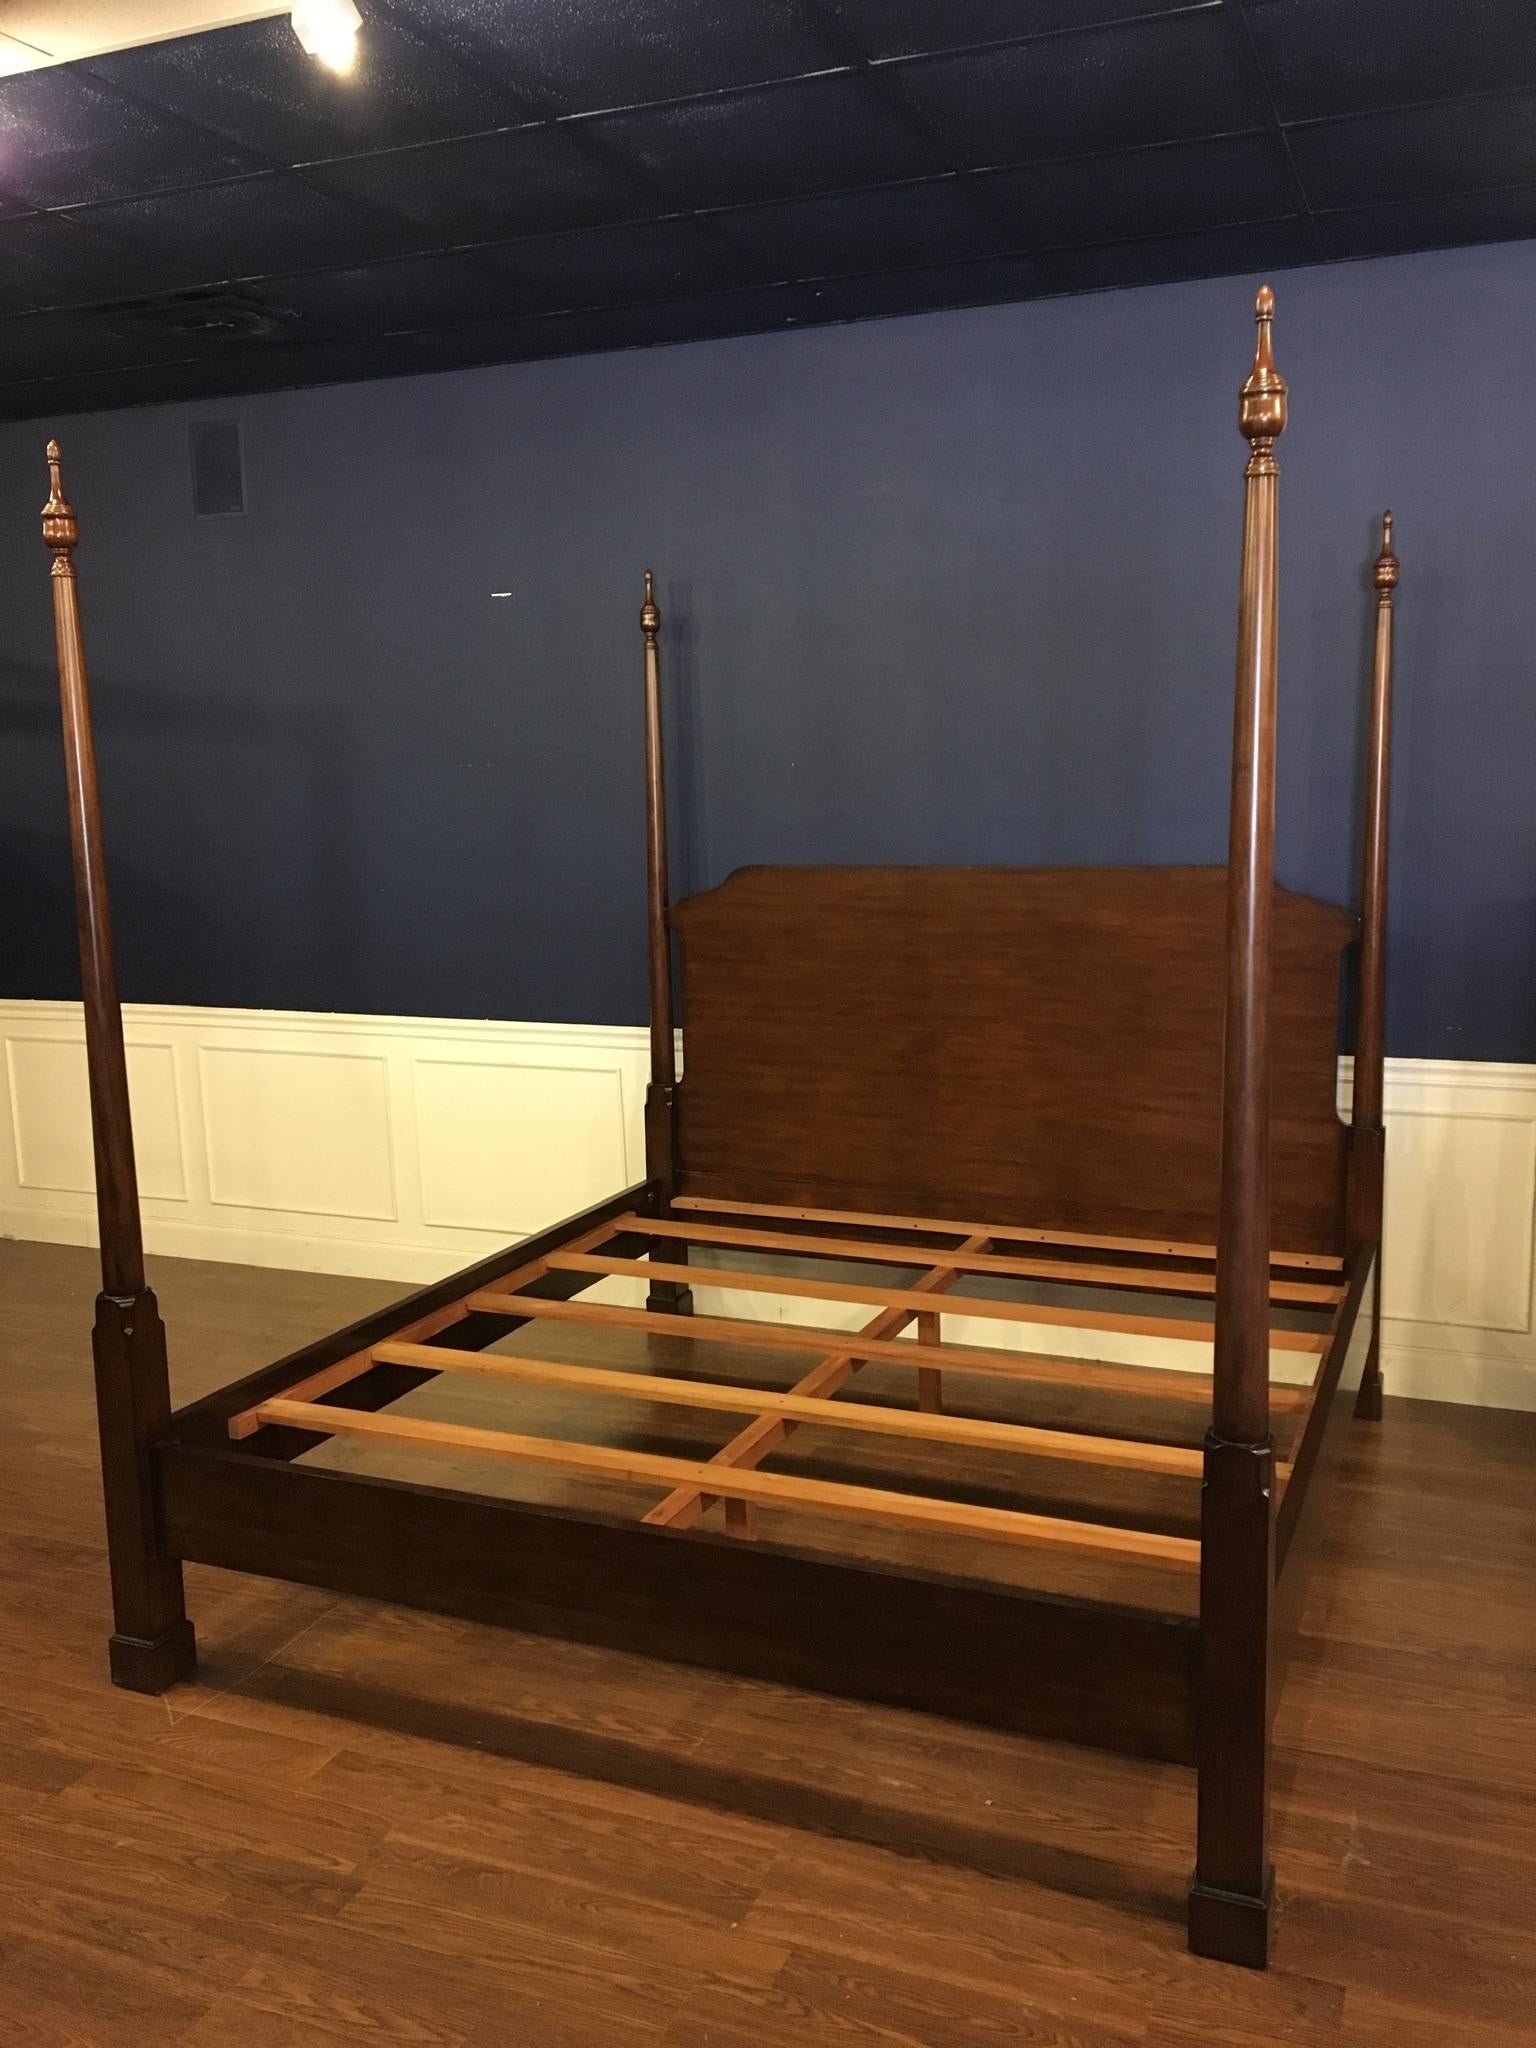 This is a new traditional king size mahogany Pencil Post Bed by Leighton Hall Furniture. It’s design was inspired by poster beds from the Regency period and features simple round tapered posts and a straight grain mahogany headboard.

Approximate